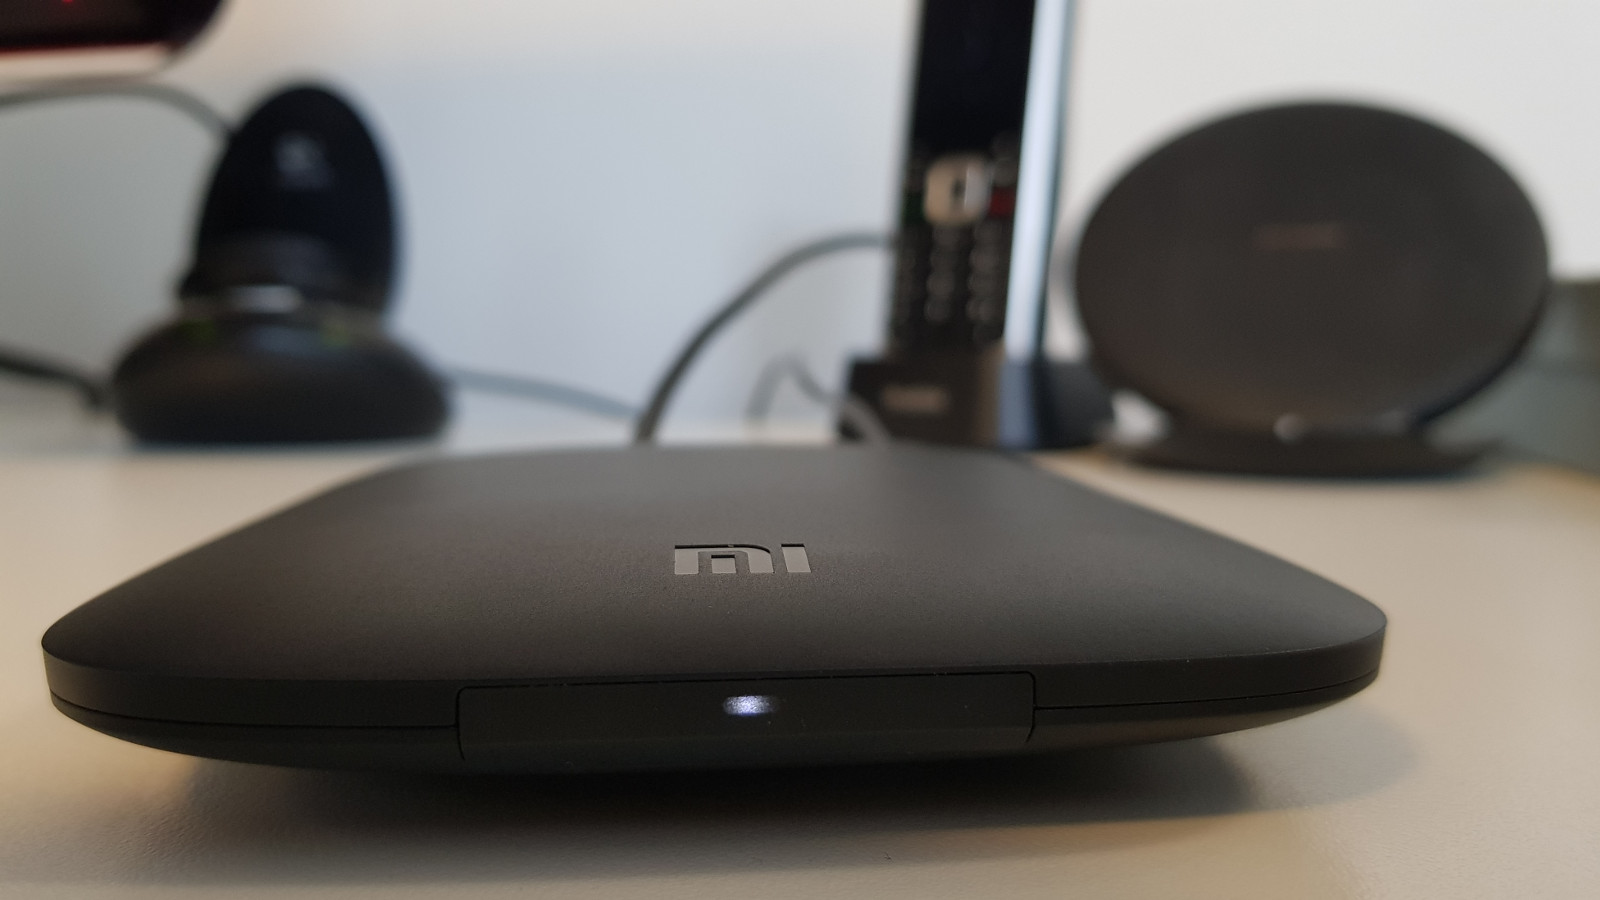 Mi Box is an affordable 4K HDR streamer, but dragged down by